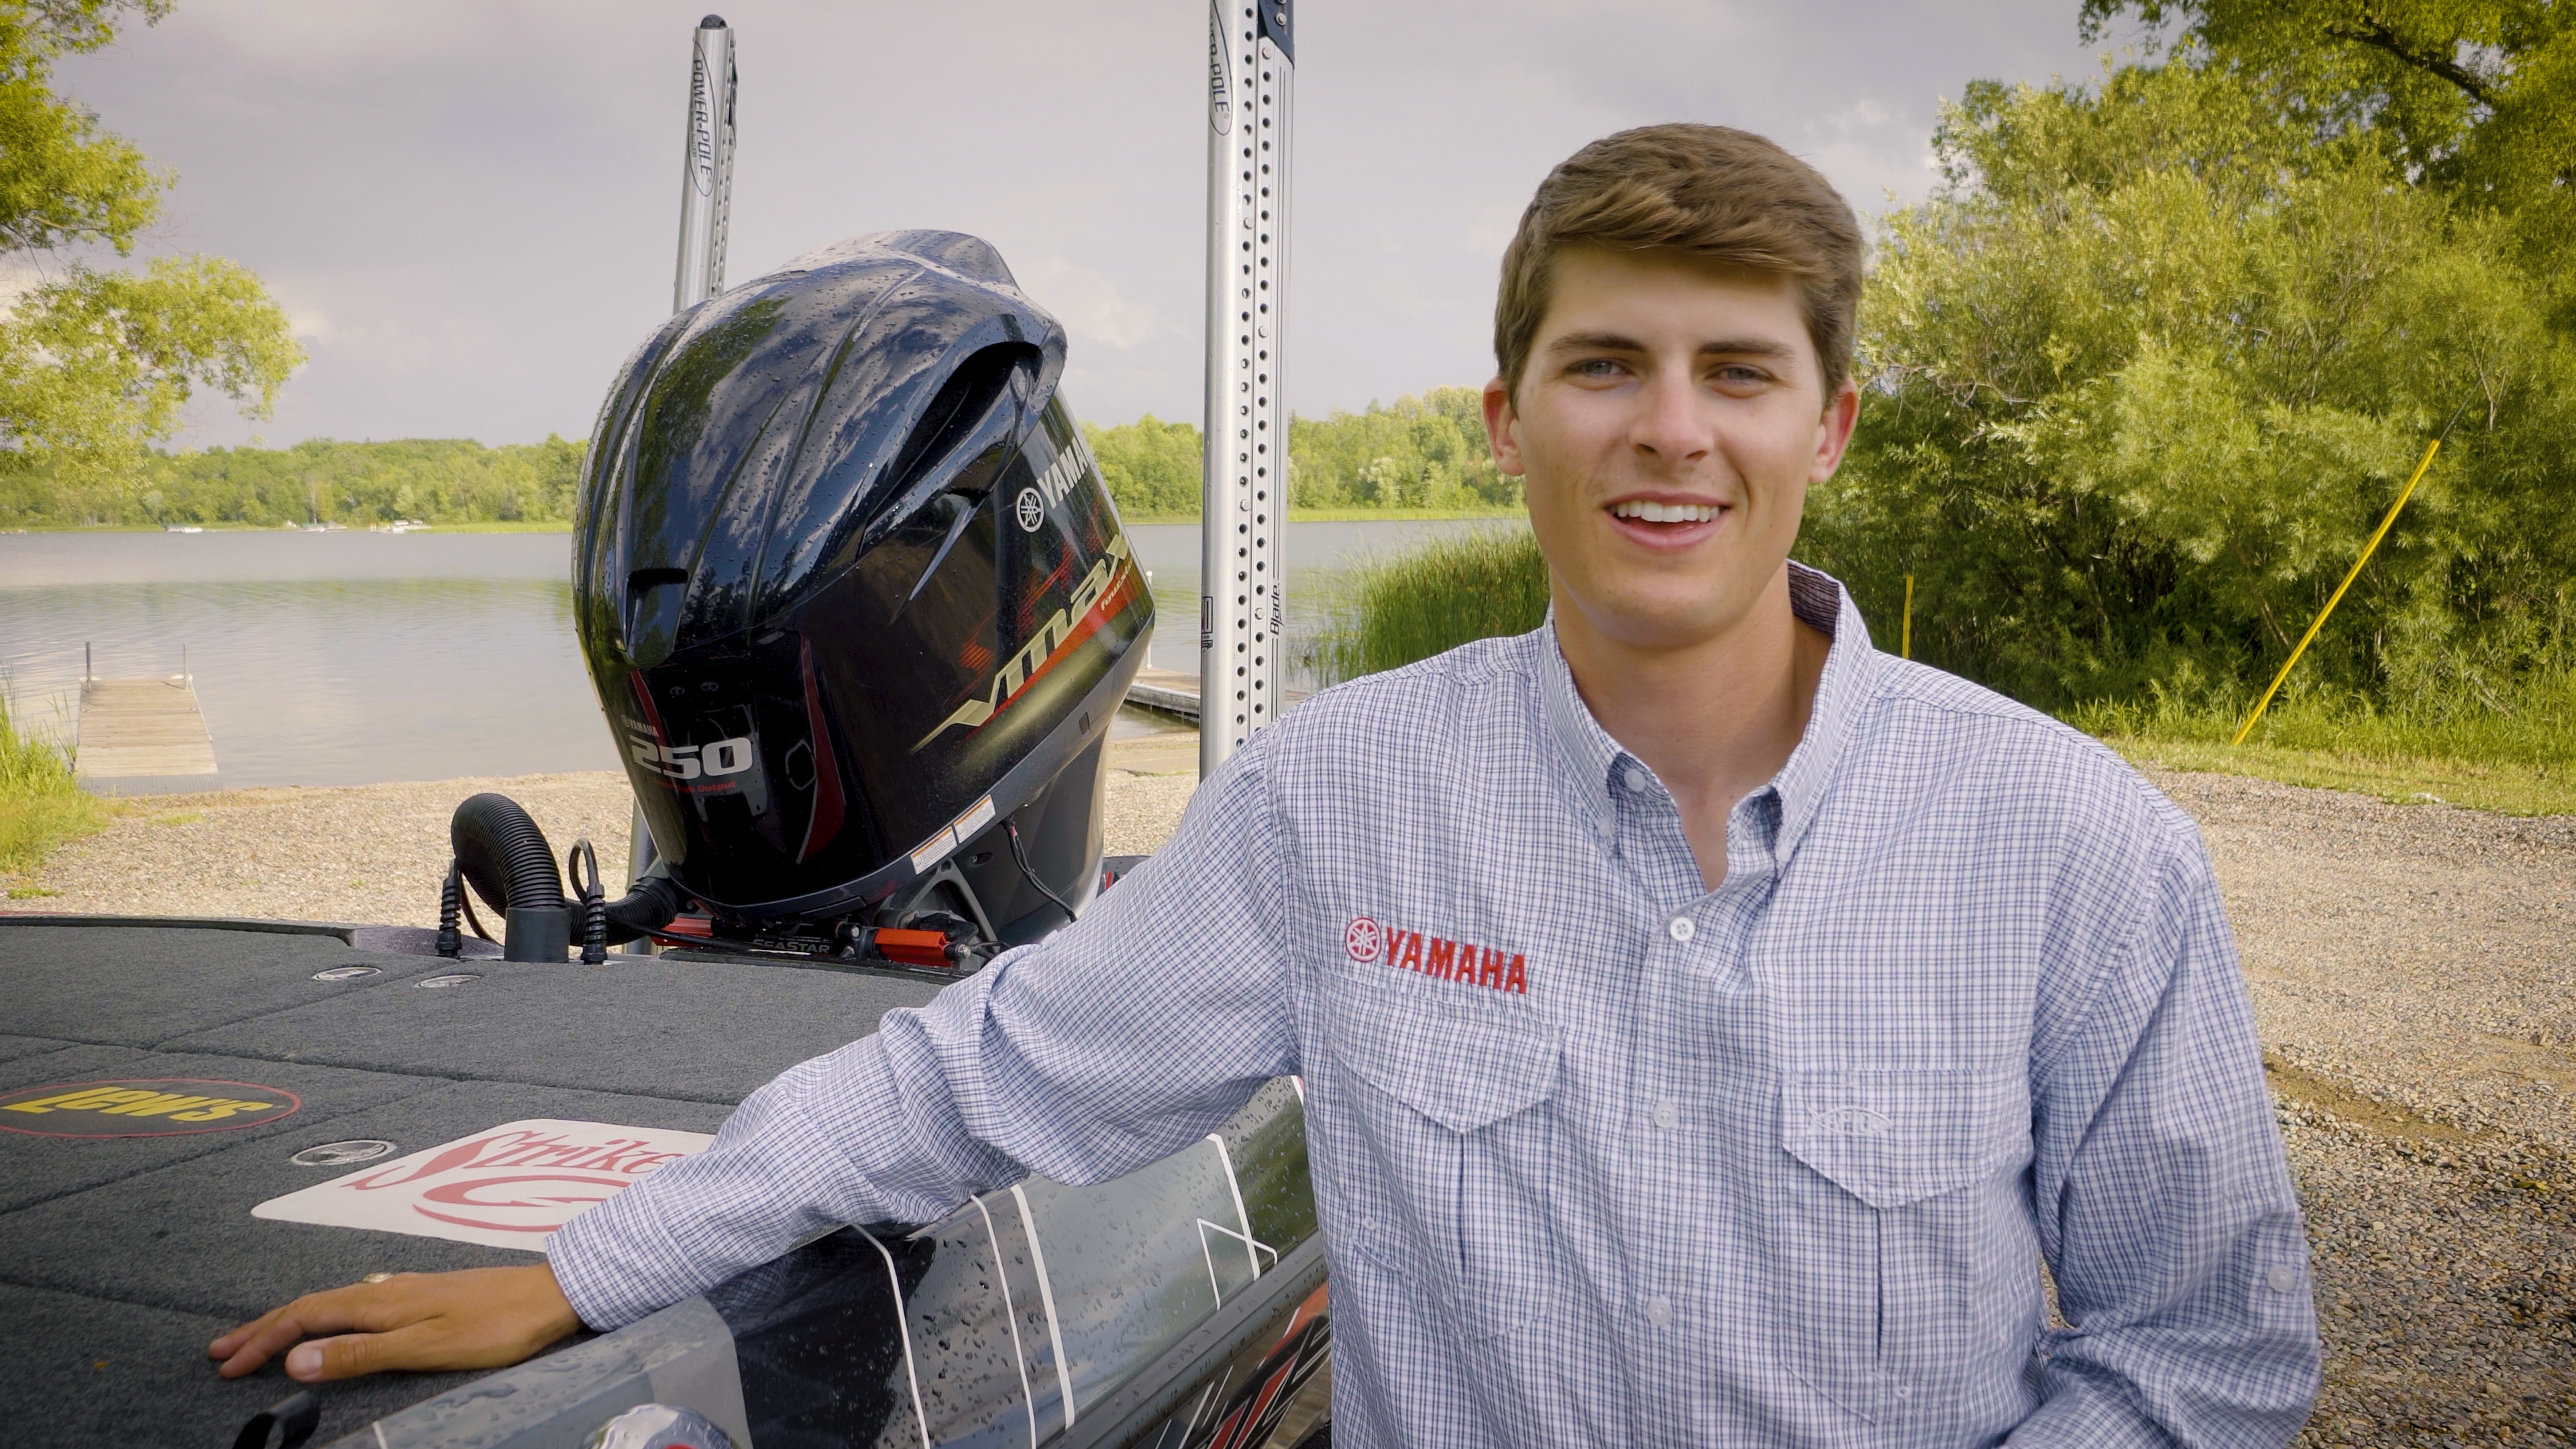 Yamaha Boating Academy Video Series Gives New Boaters Basic Tips, Promotes  Safety